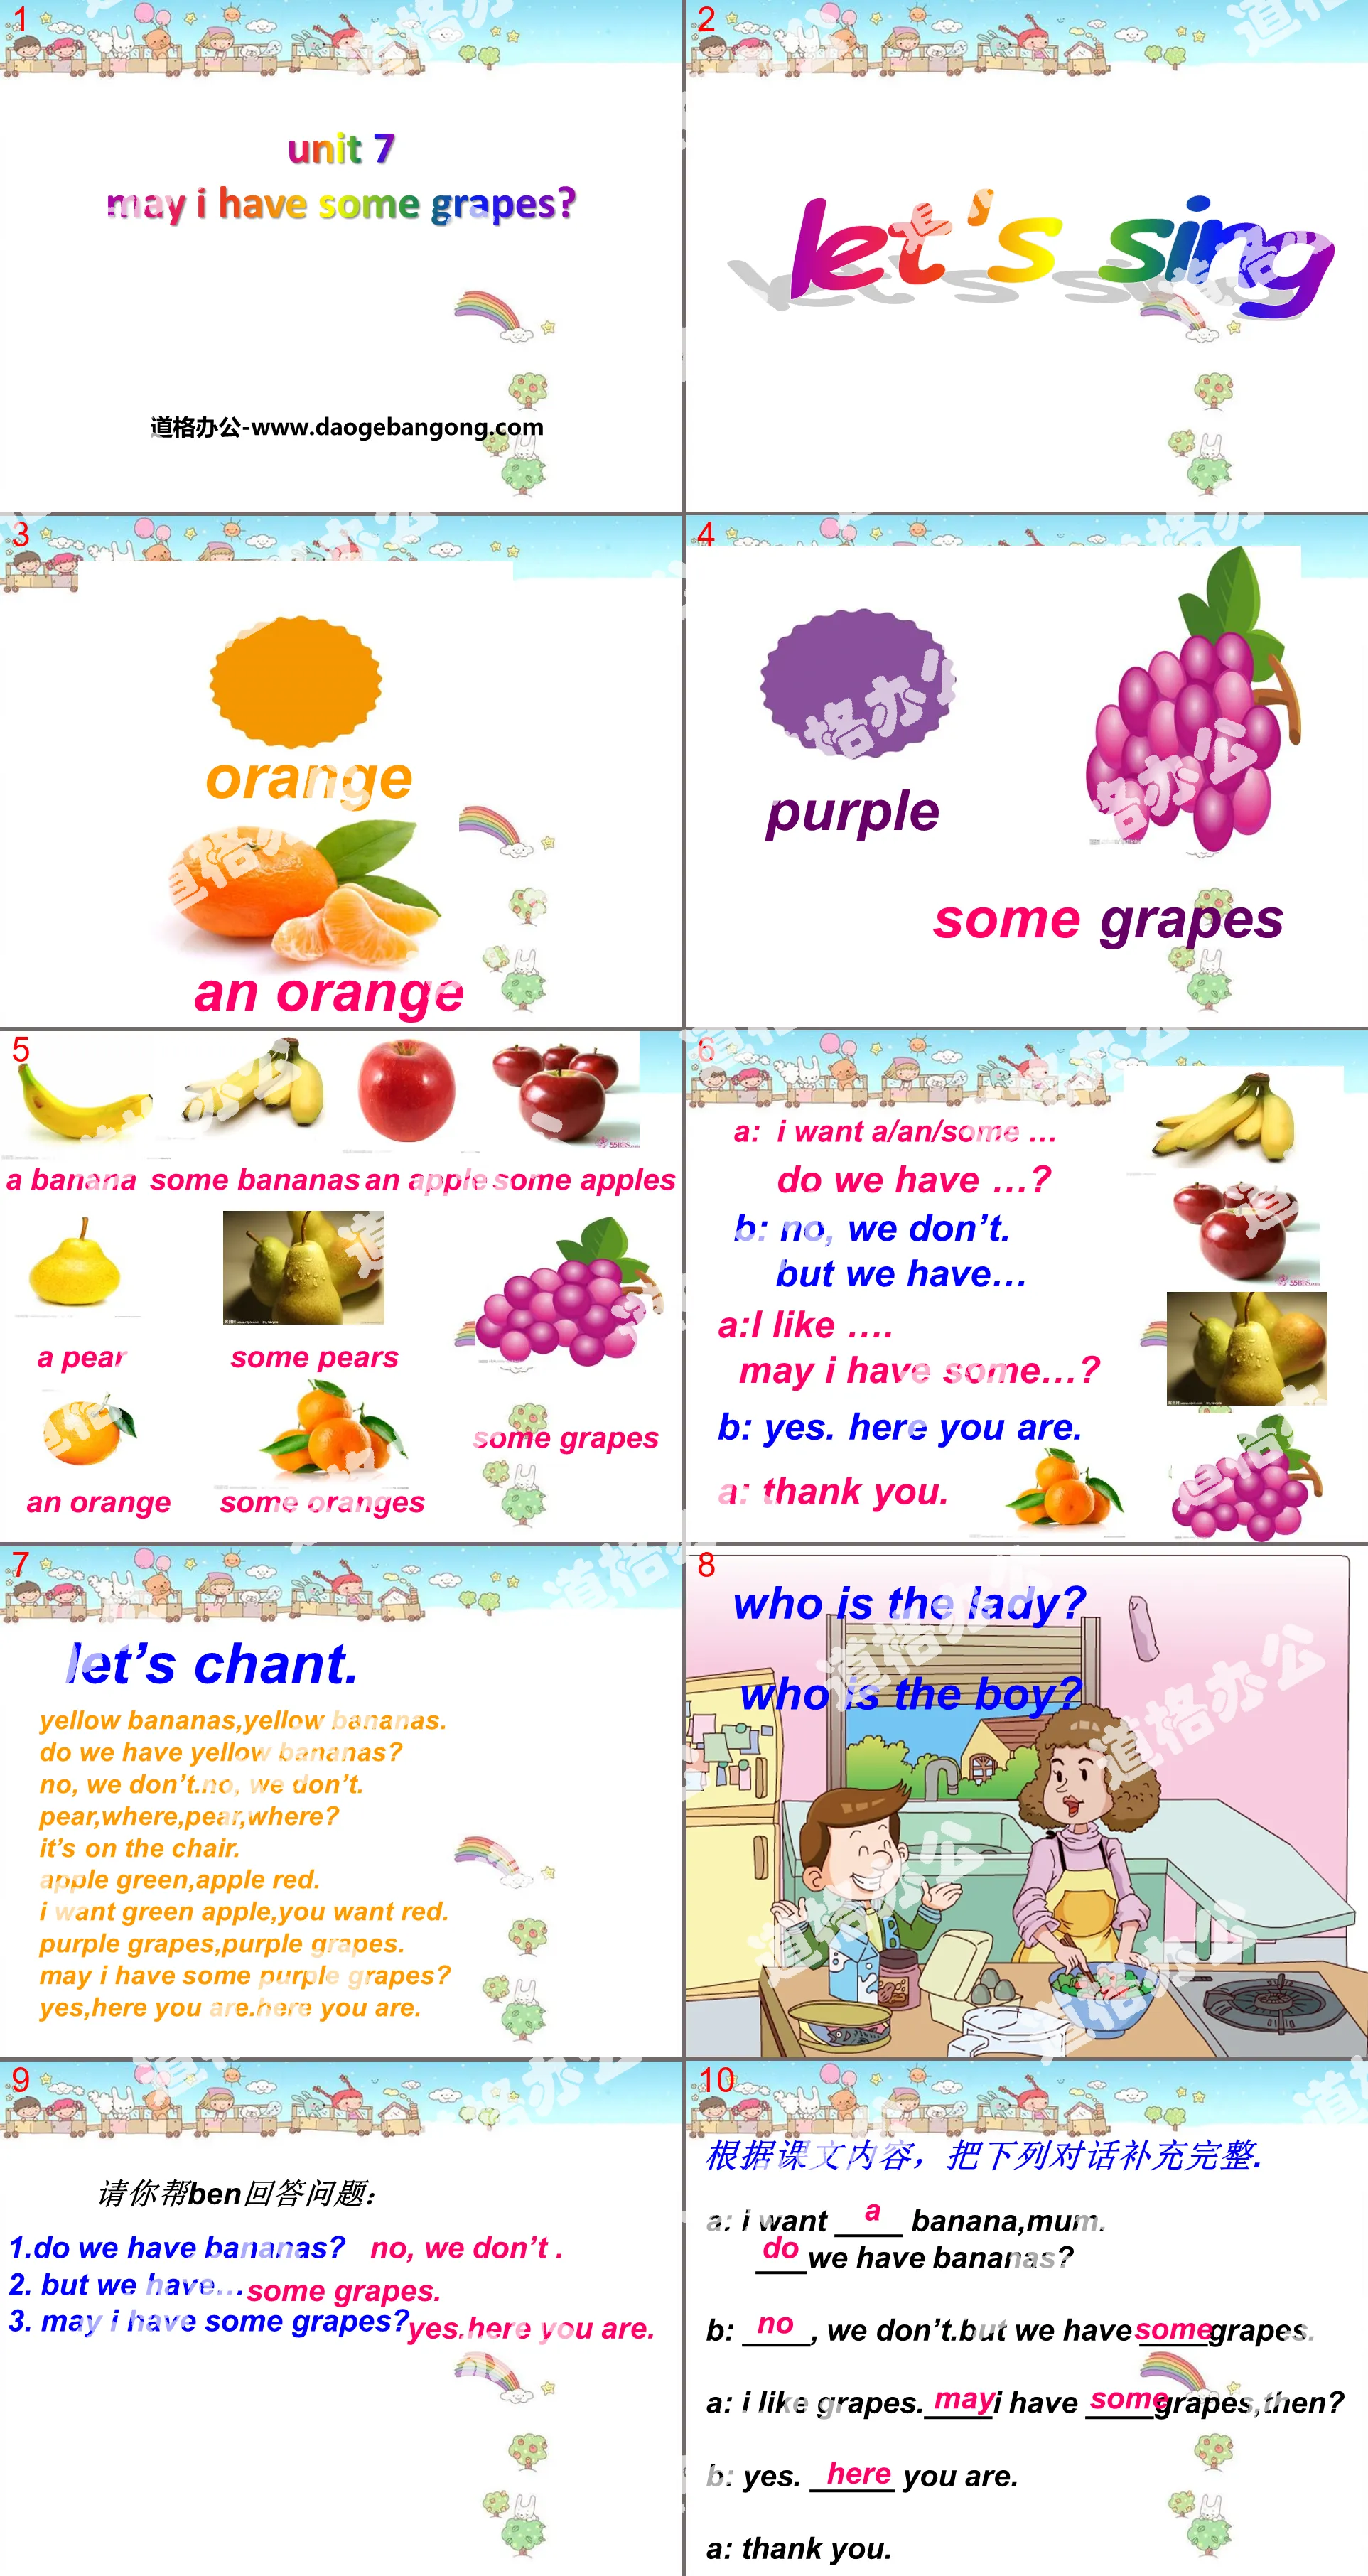 "May I have some grapes?" PPT